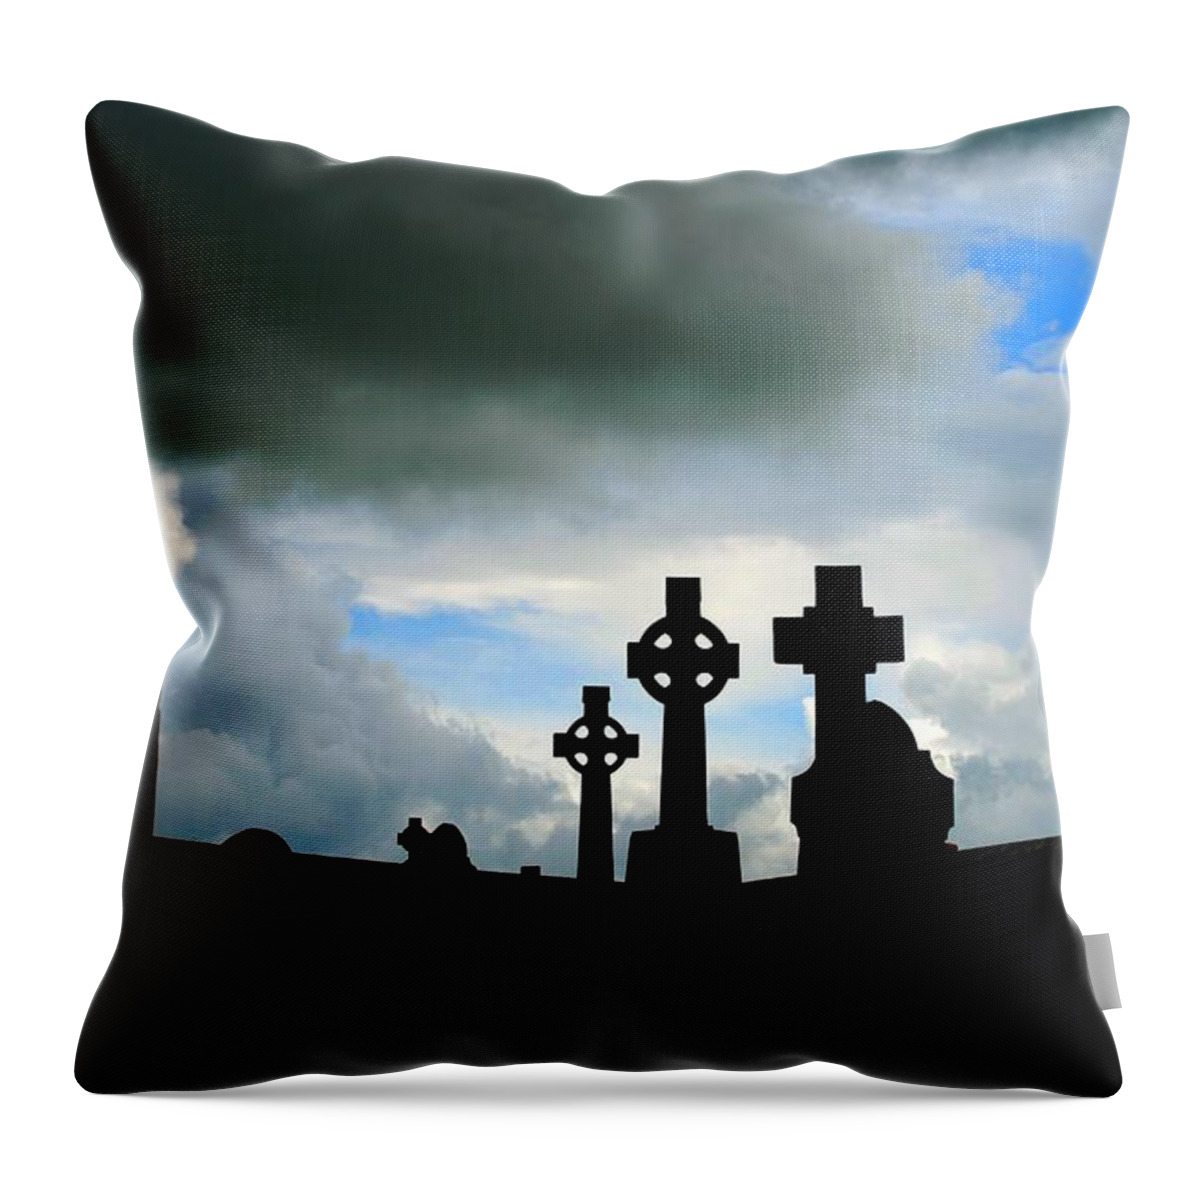 Skyline Throw Pillow featuring the photograph In Thy Name by Norma Brock